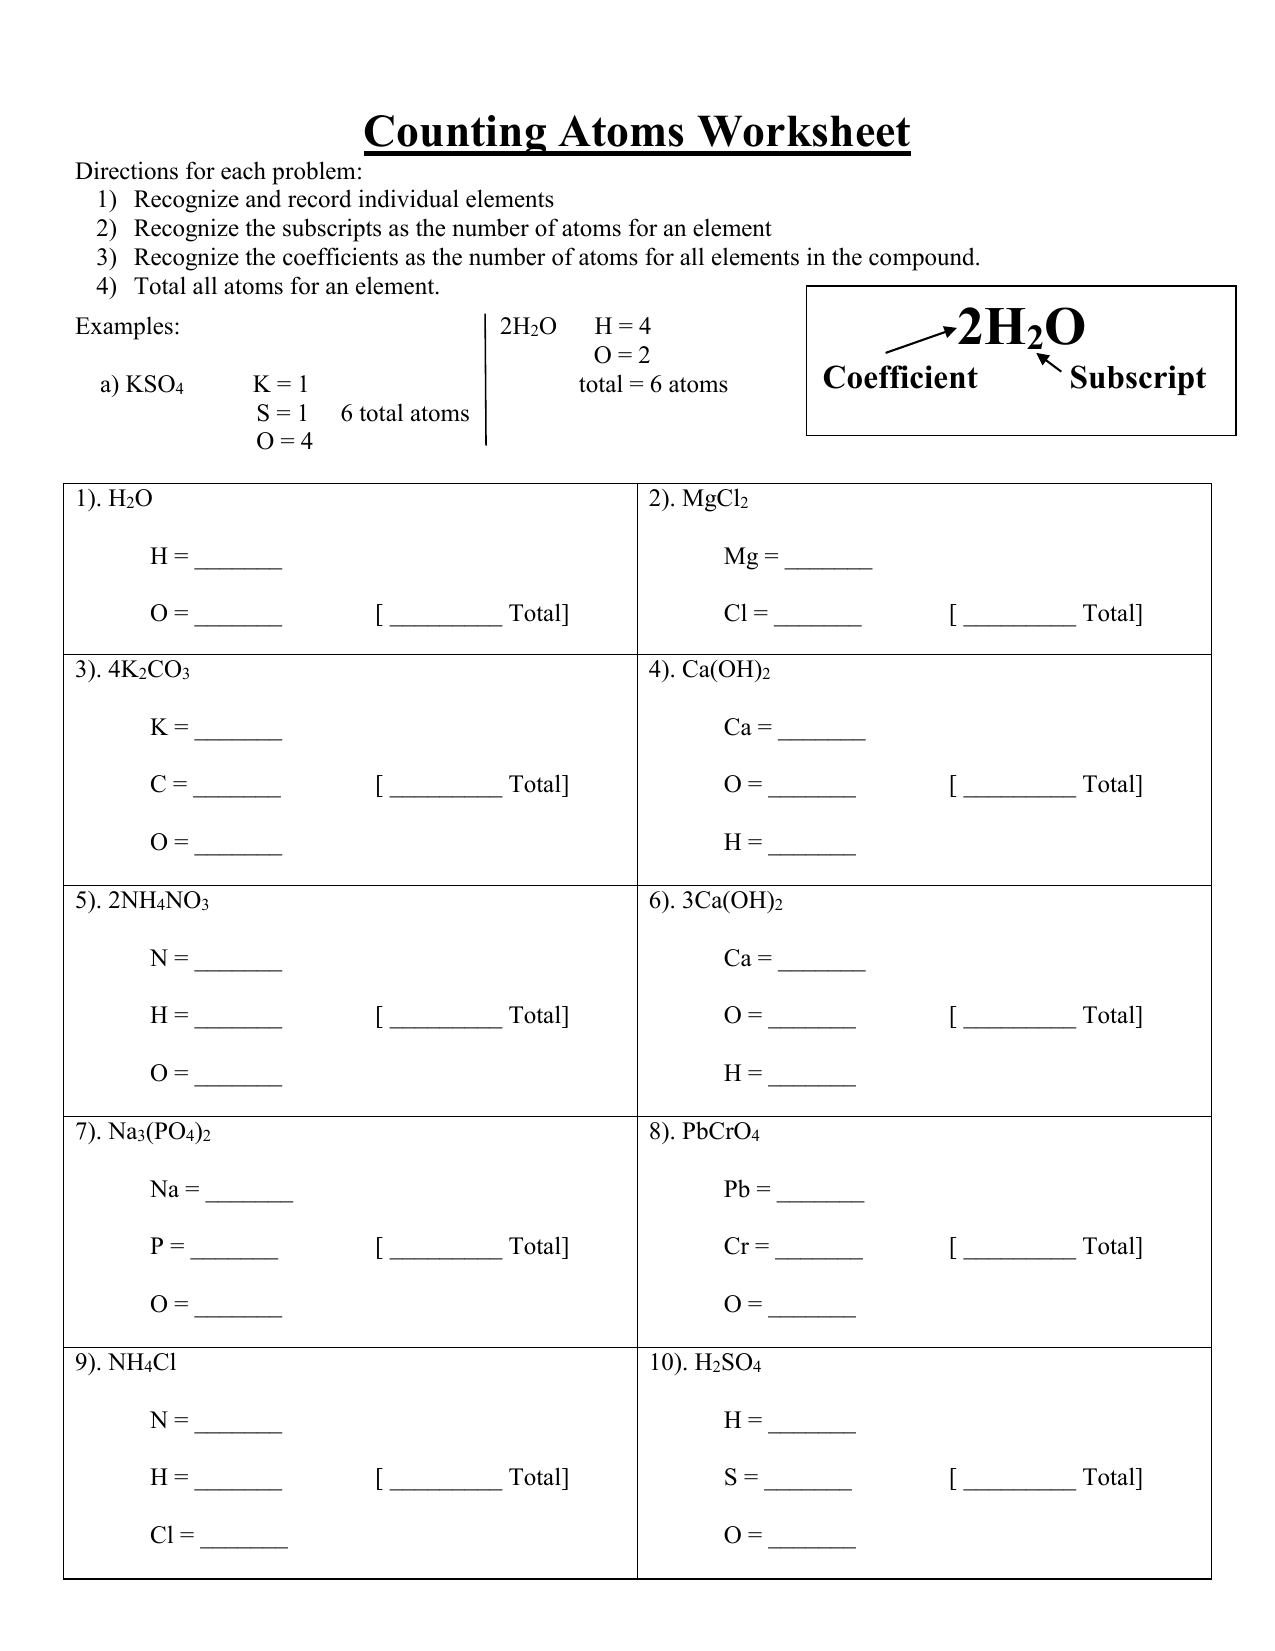 Counting Atoms #22 W.S. Pertaining To Counting Atoms Worksheet Answers